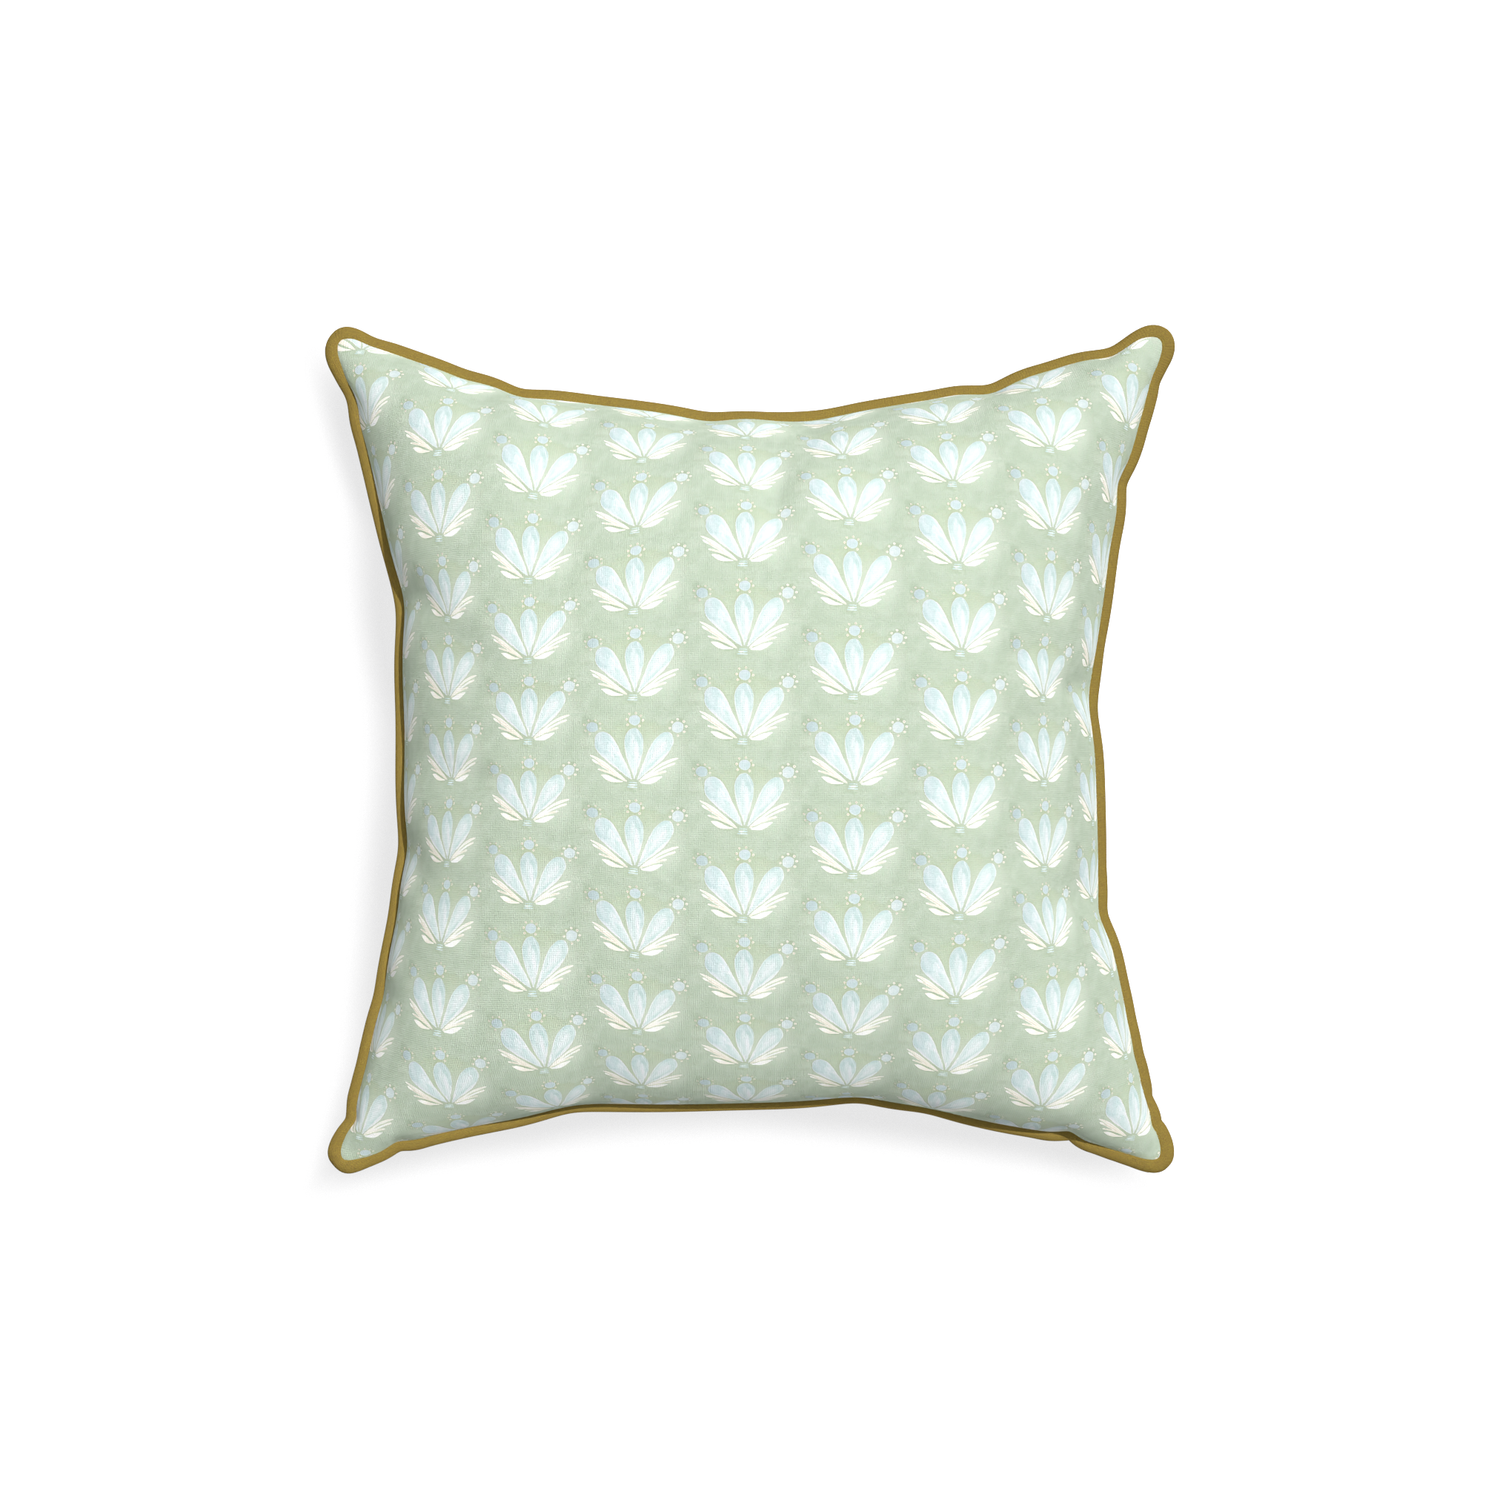 18-square serena sea salt custom blue & green floral drop repeatpillow with c piping on white background